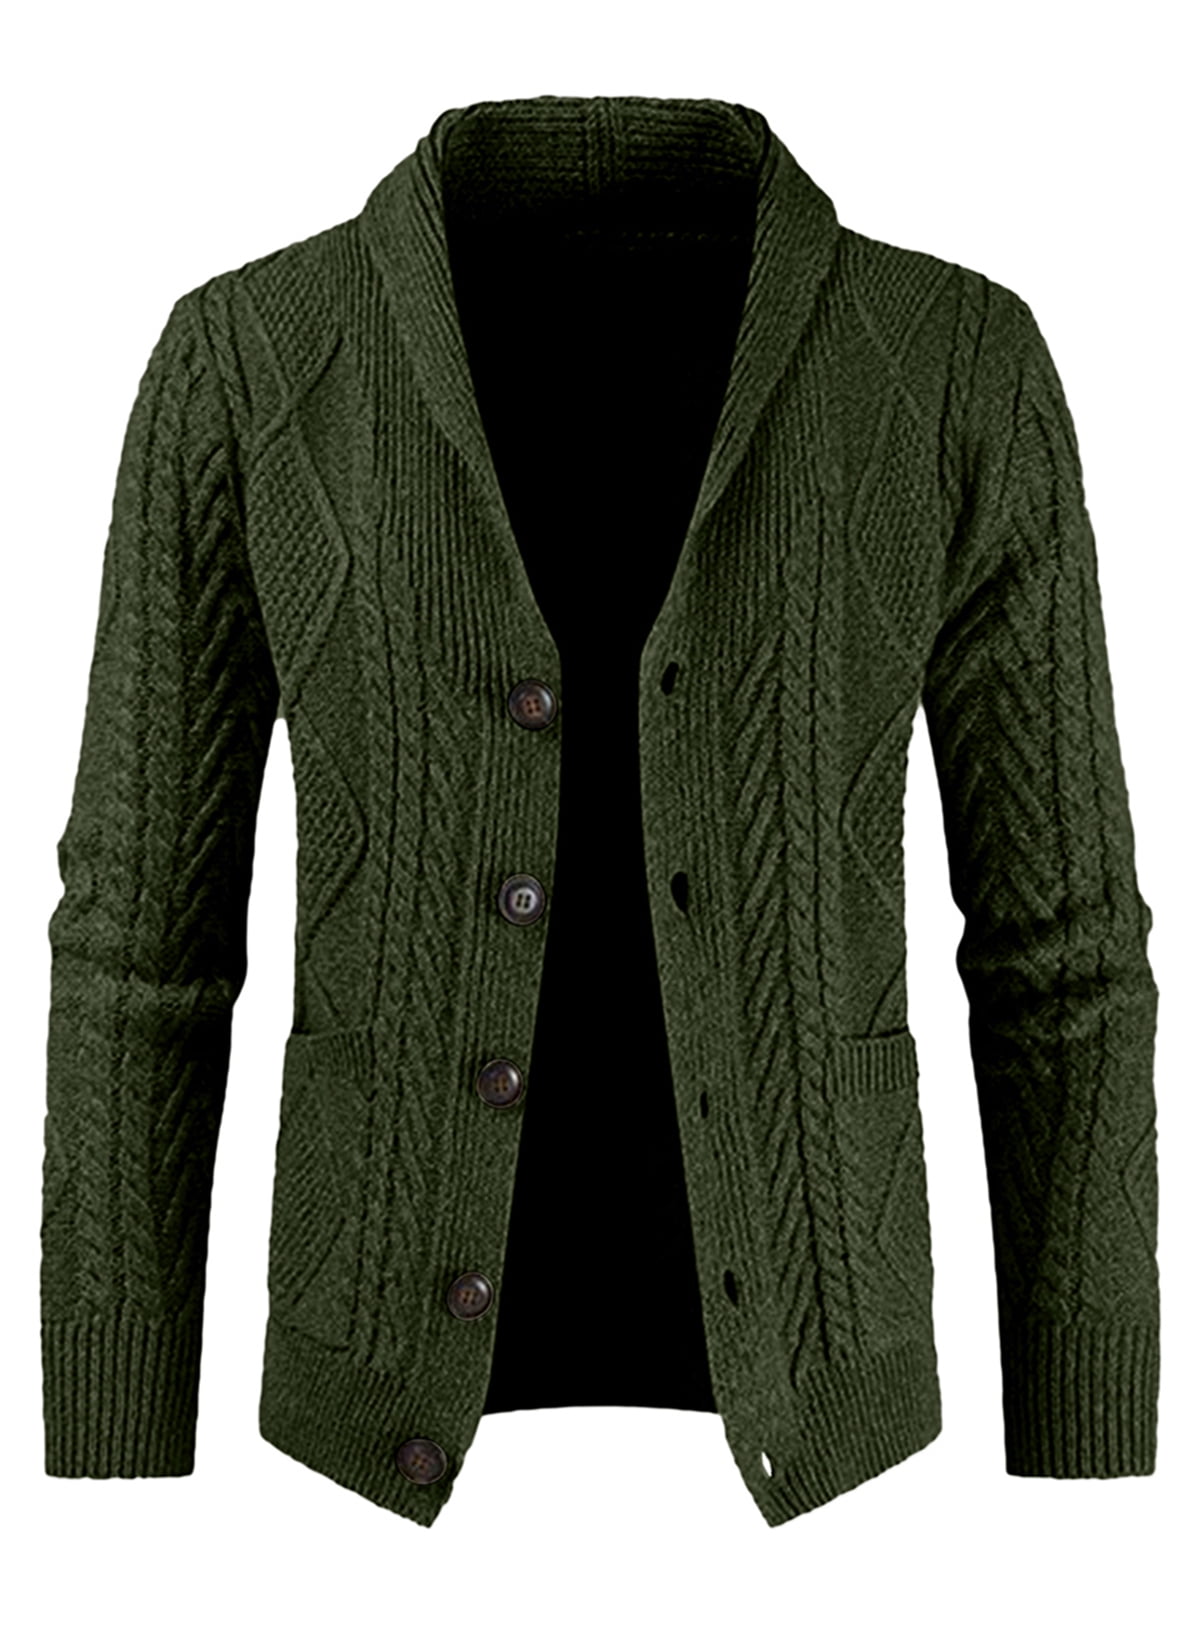 JMIERR Men Casual Long Sleeve Cardigan Sweaters Cable Knit Buttons Down ...